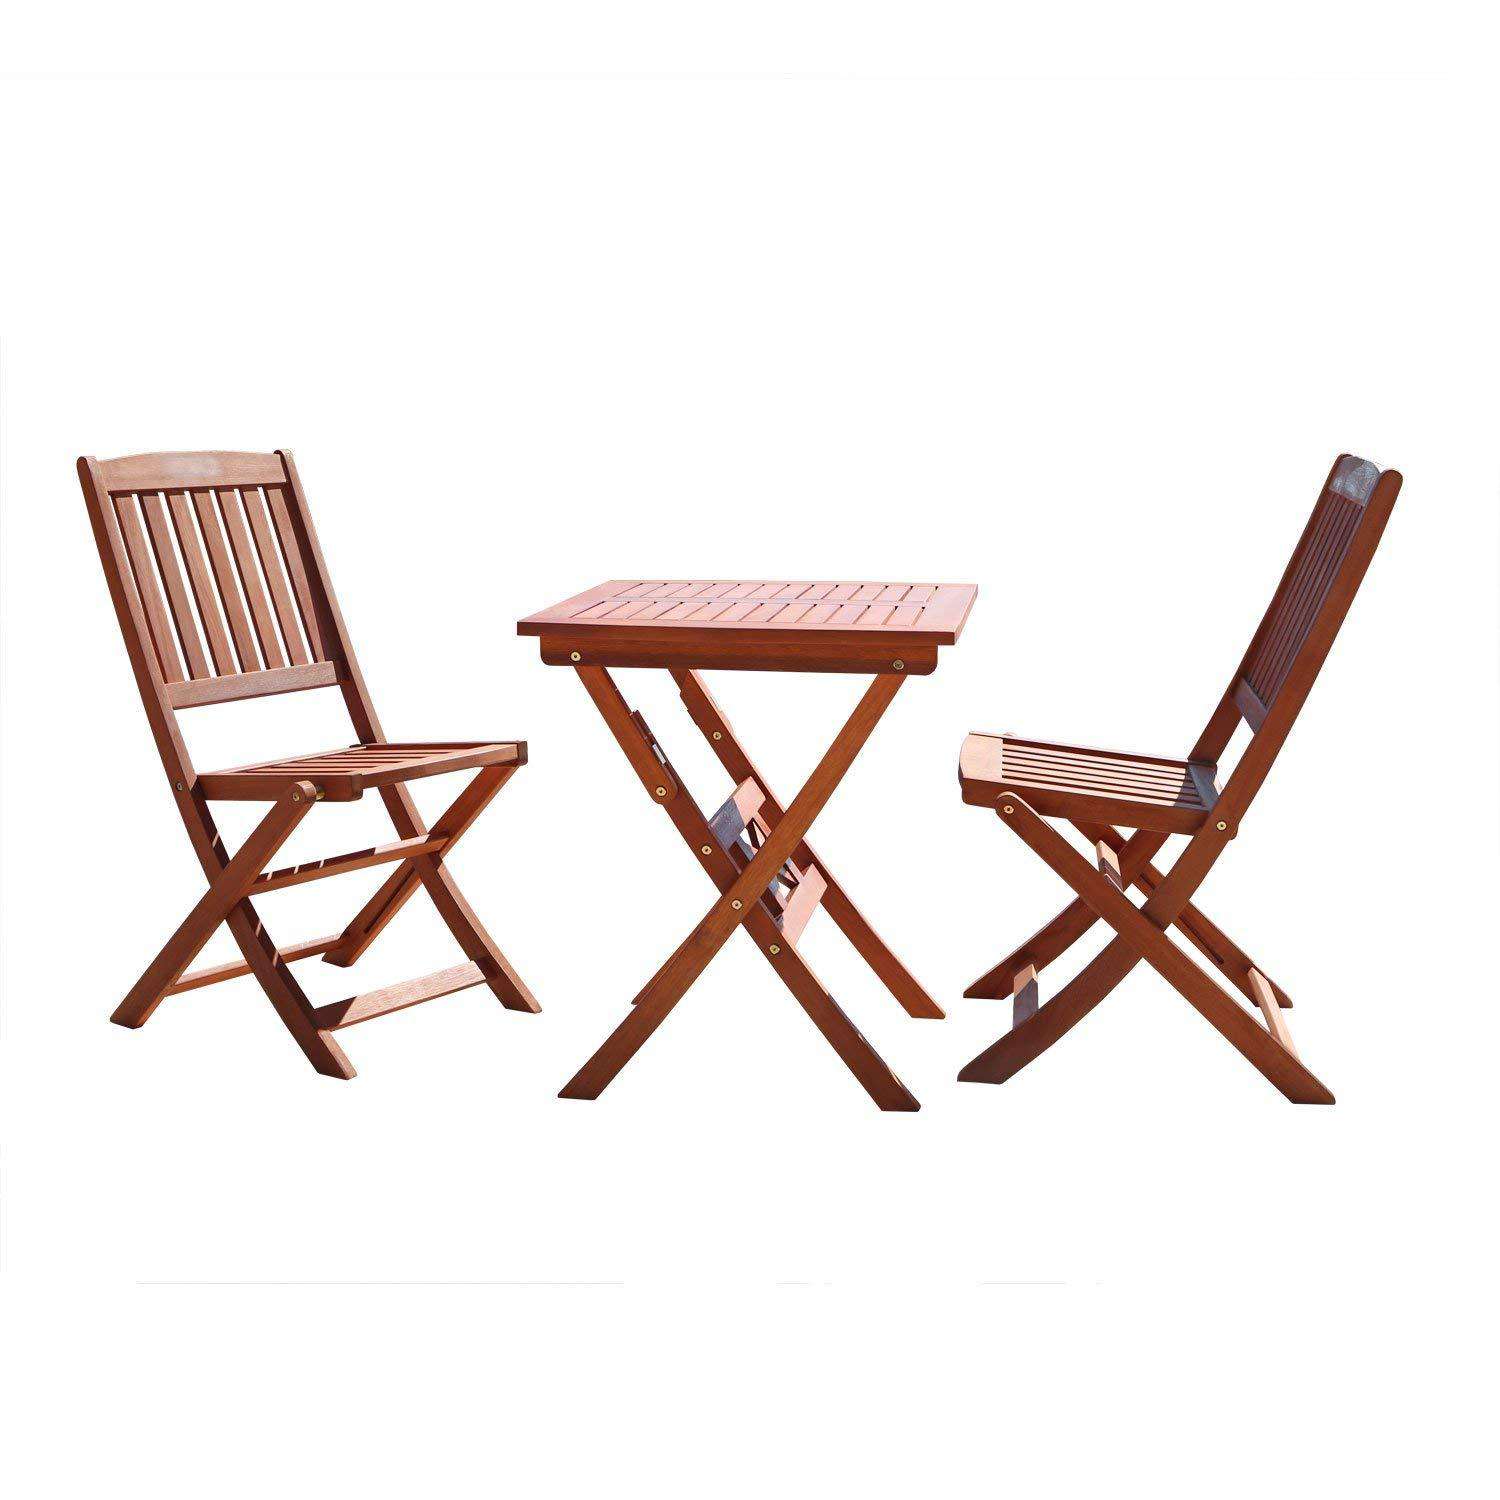 Patio Furniture For Outdoor Living & Relaxation